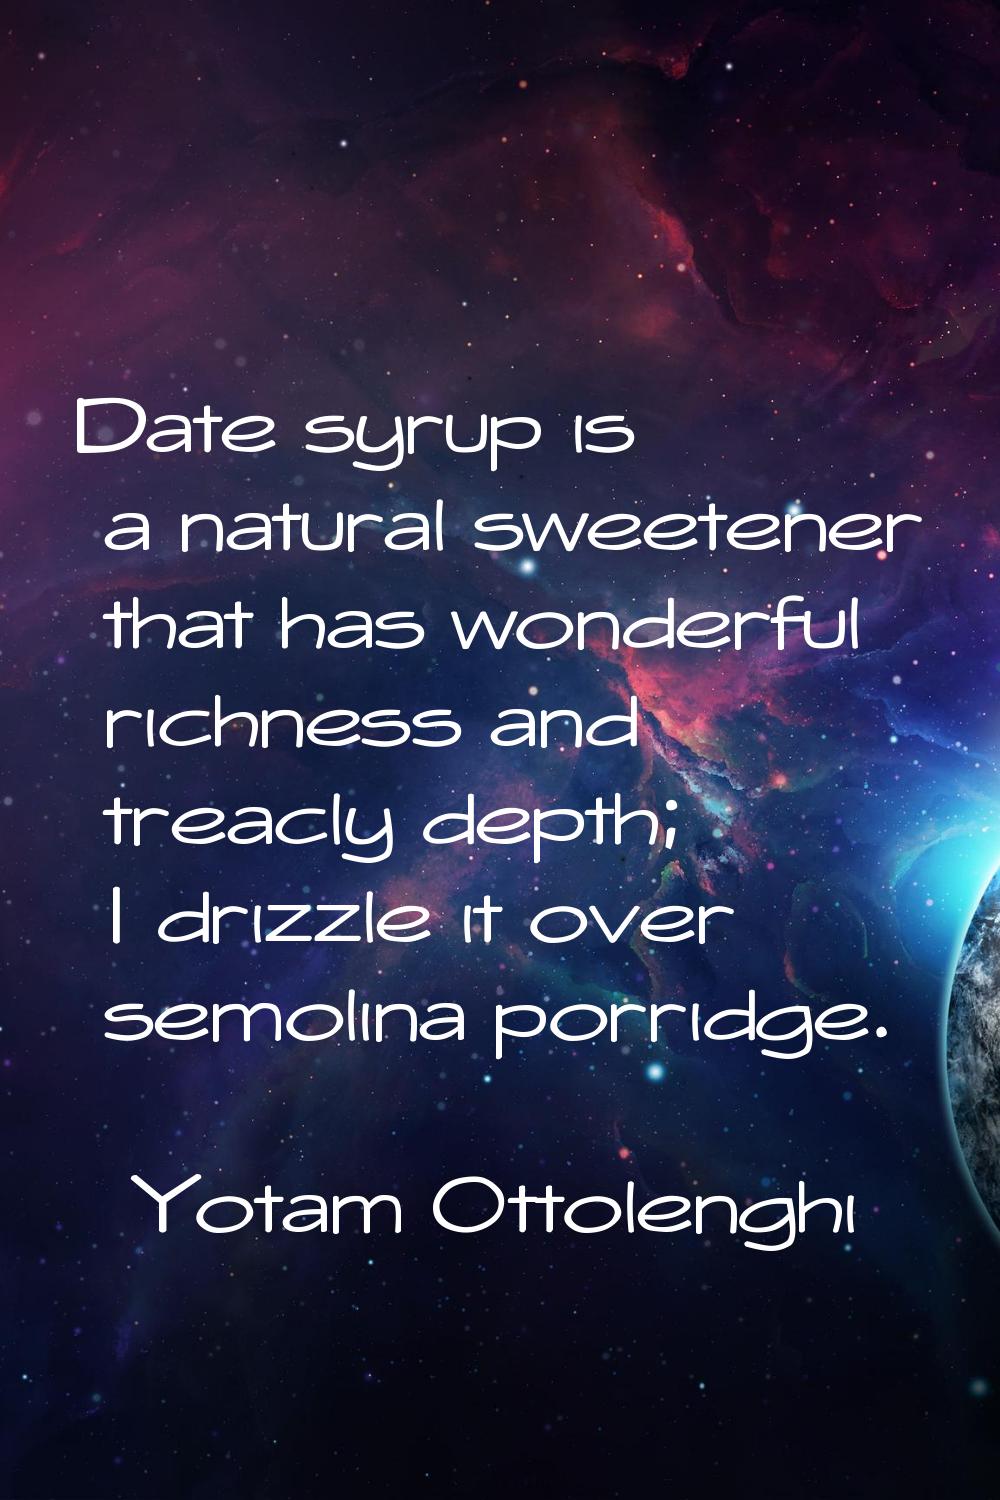 Date syrup is a natural sweetener that has wonderful richness and treacly depth; I drizzle it over 